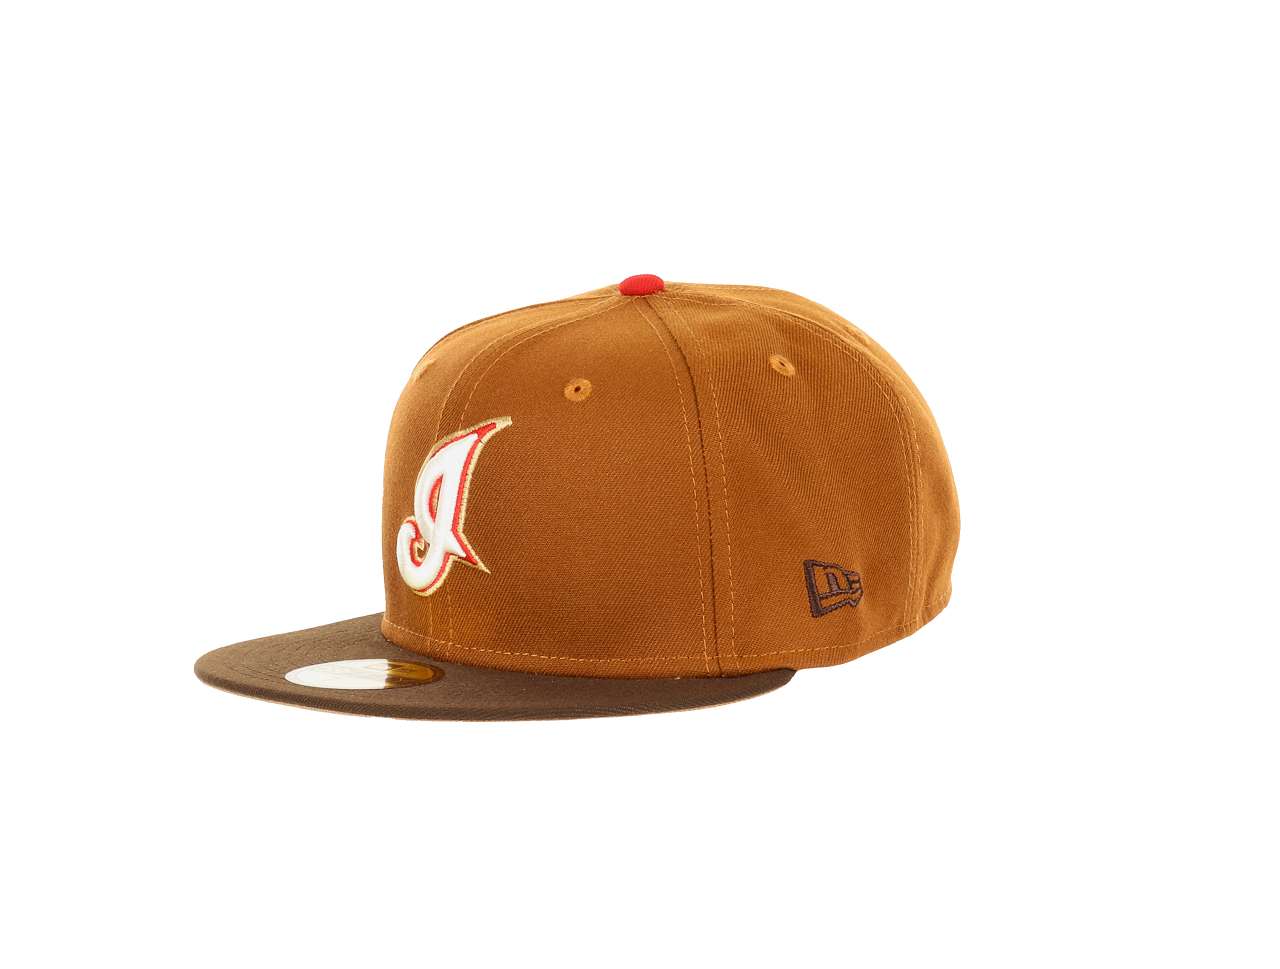 Cleveland Indians MLB Jacobs Field 10th Anniversary Sidepatch Brown 59Fifty Basecap New Era